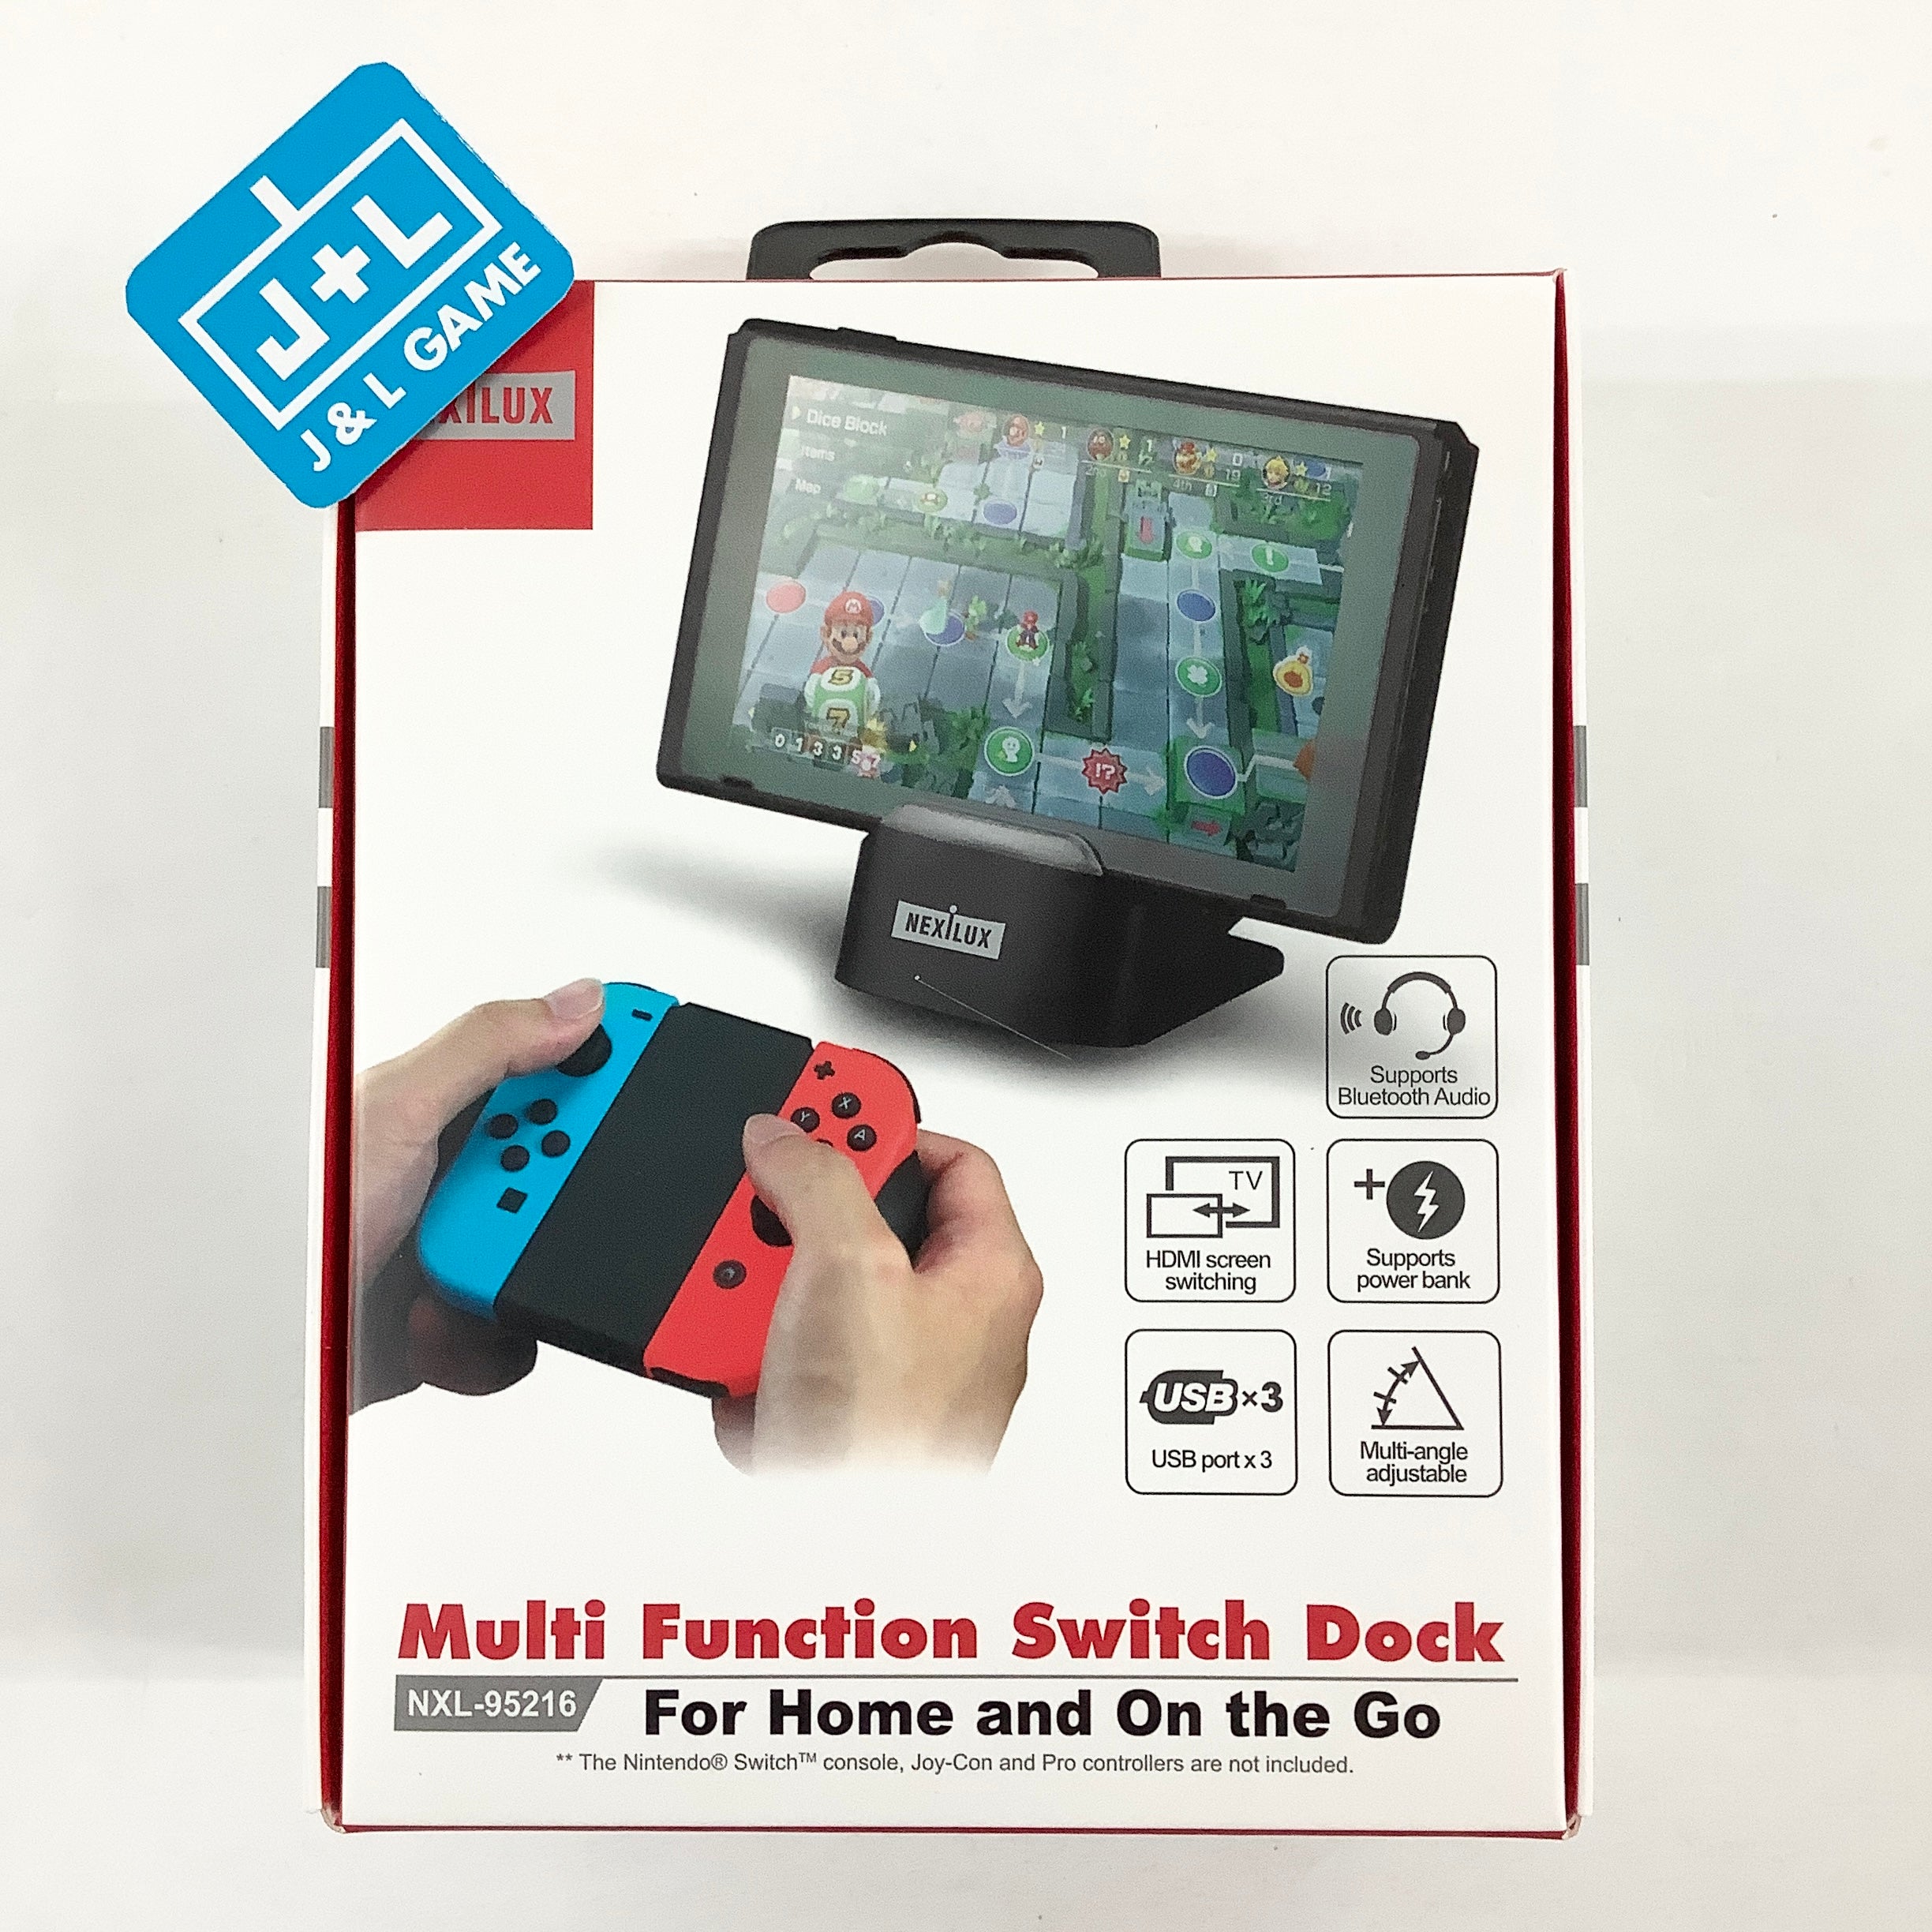 Multi Function Switch Dock for Home and On the Go - Portable, Bluetooth & 3 USB Ports - (NSW) Nintendo Switch Accessories NEXiLUX   